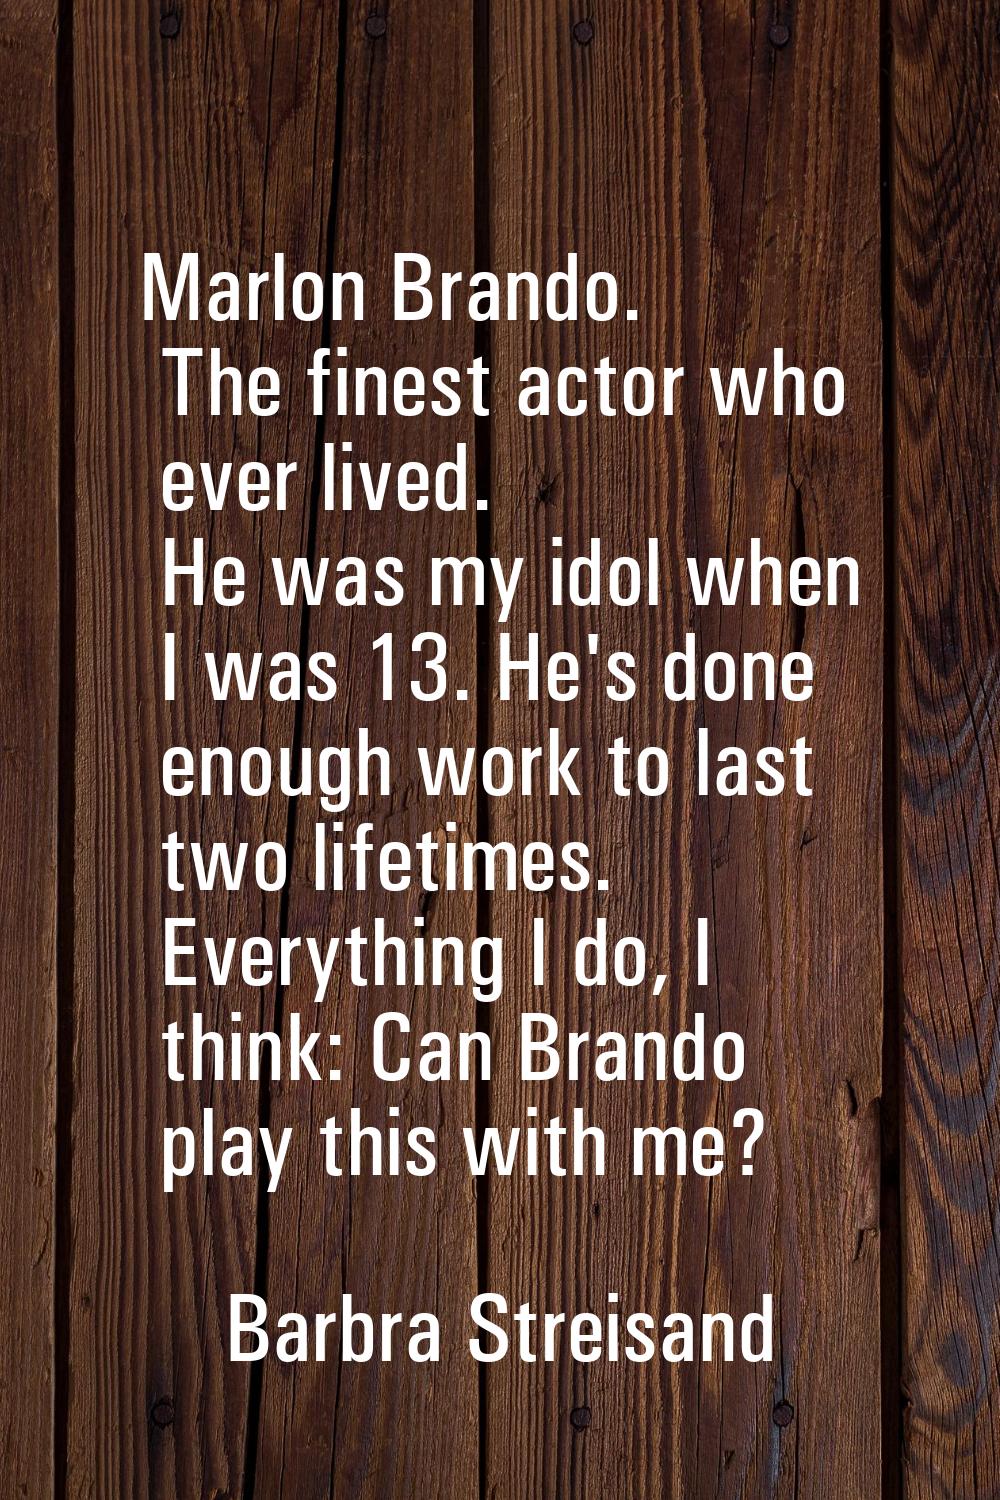 Marlon Brando. The finest actor who ever lived. He was my idol when I was 13. He's done enough work